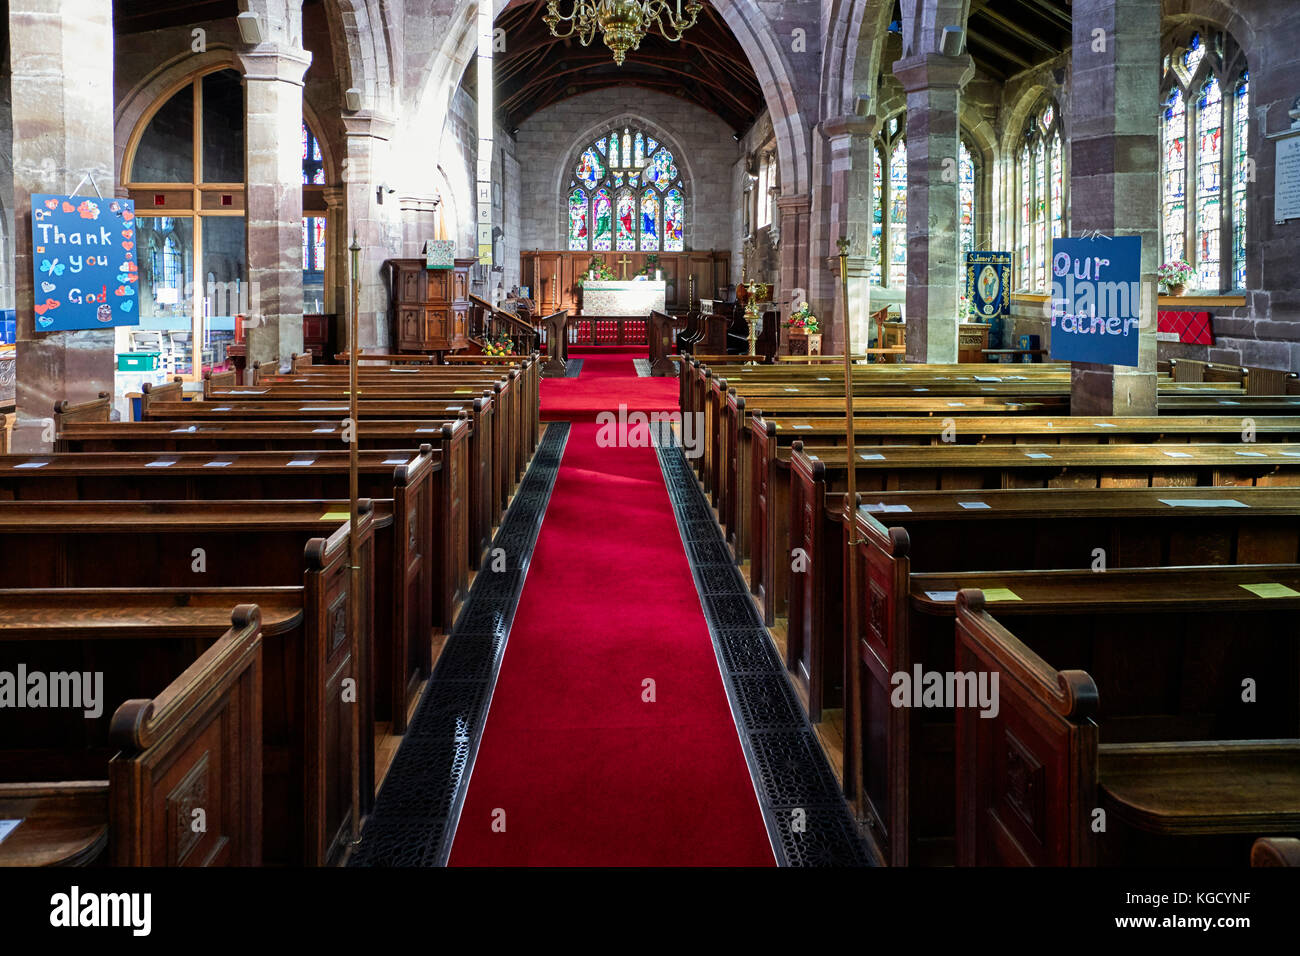 St James Church di Audlem, Cheshire Foto Stock